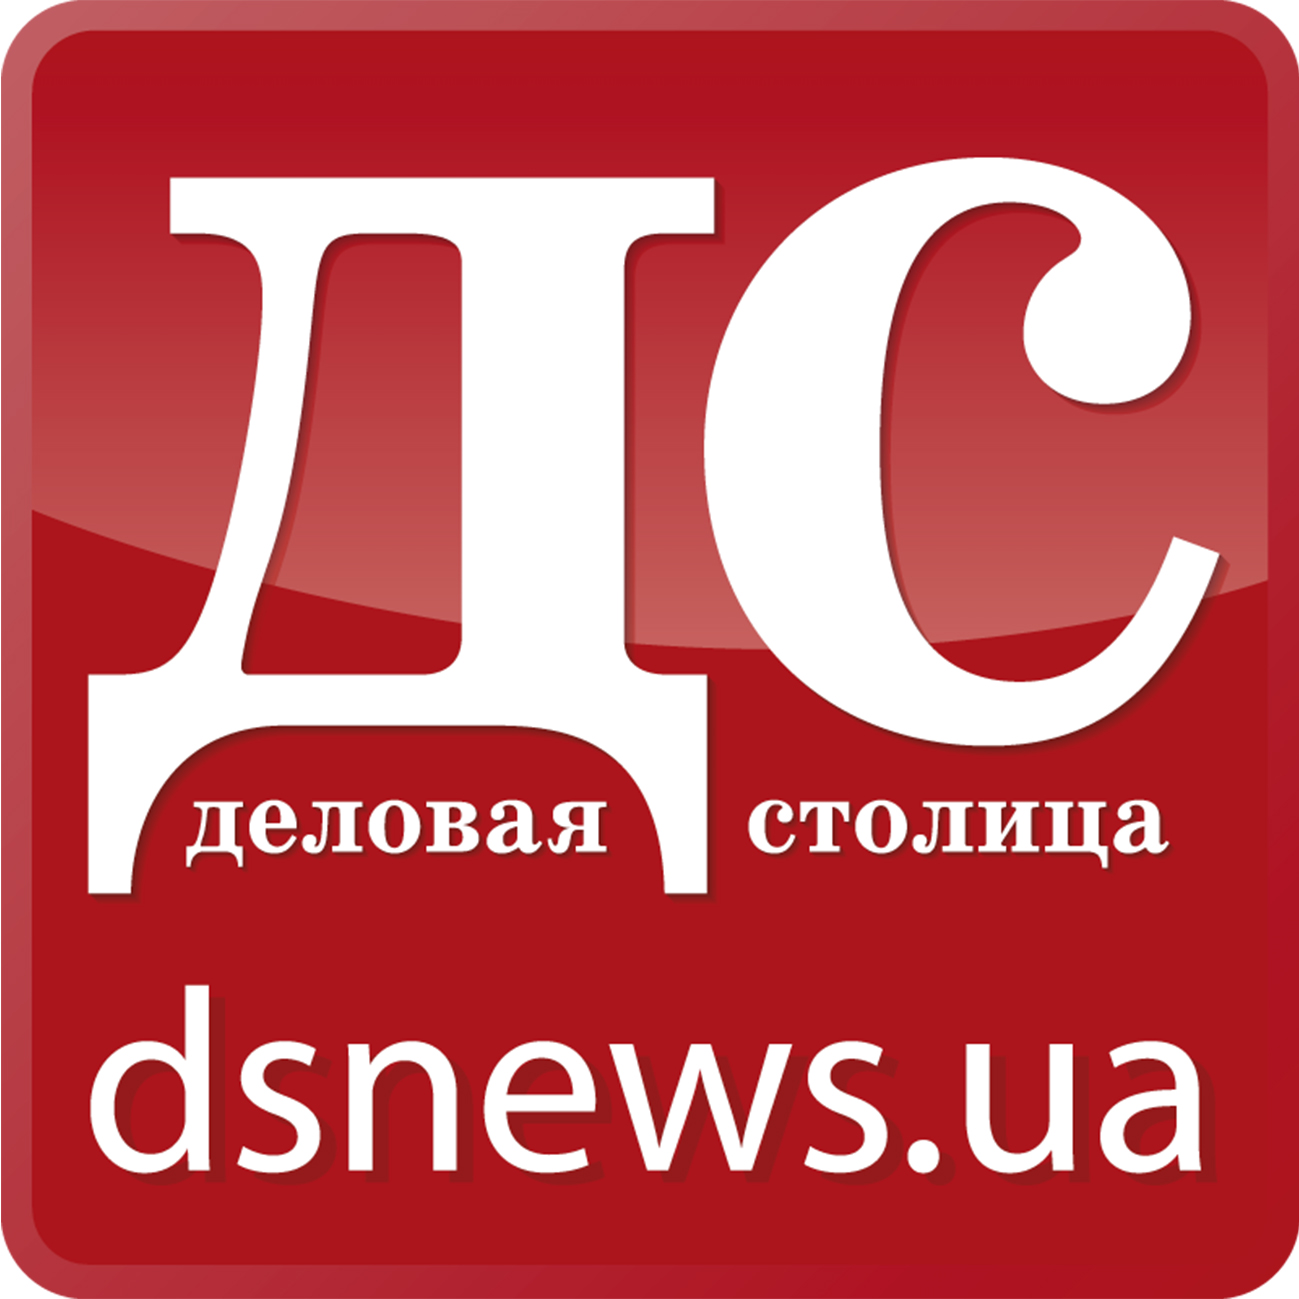 DSNEWS.UA is the information partner of the  tournament